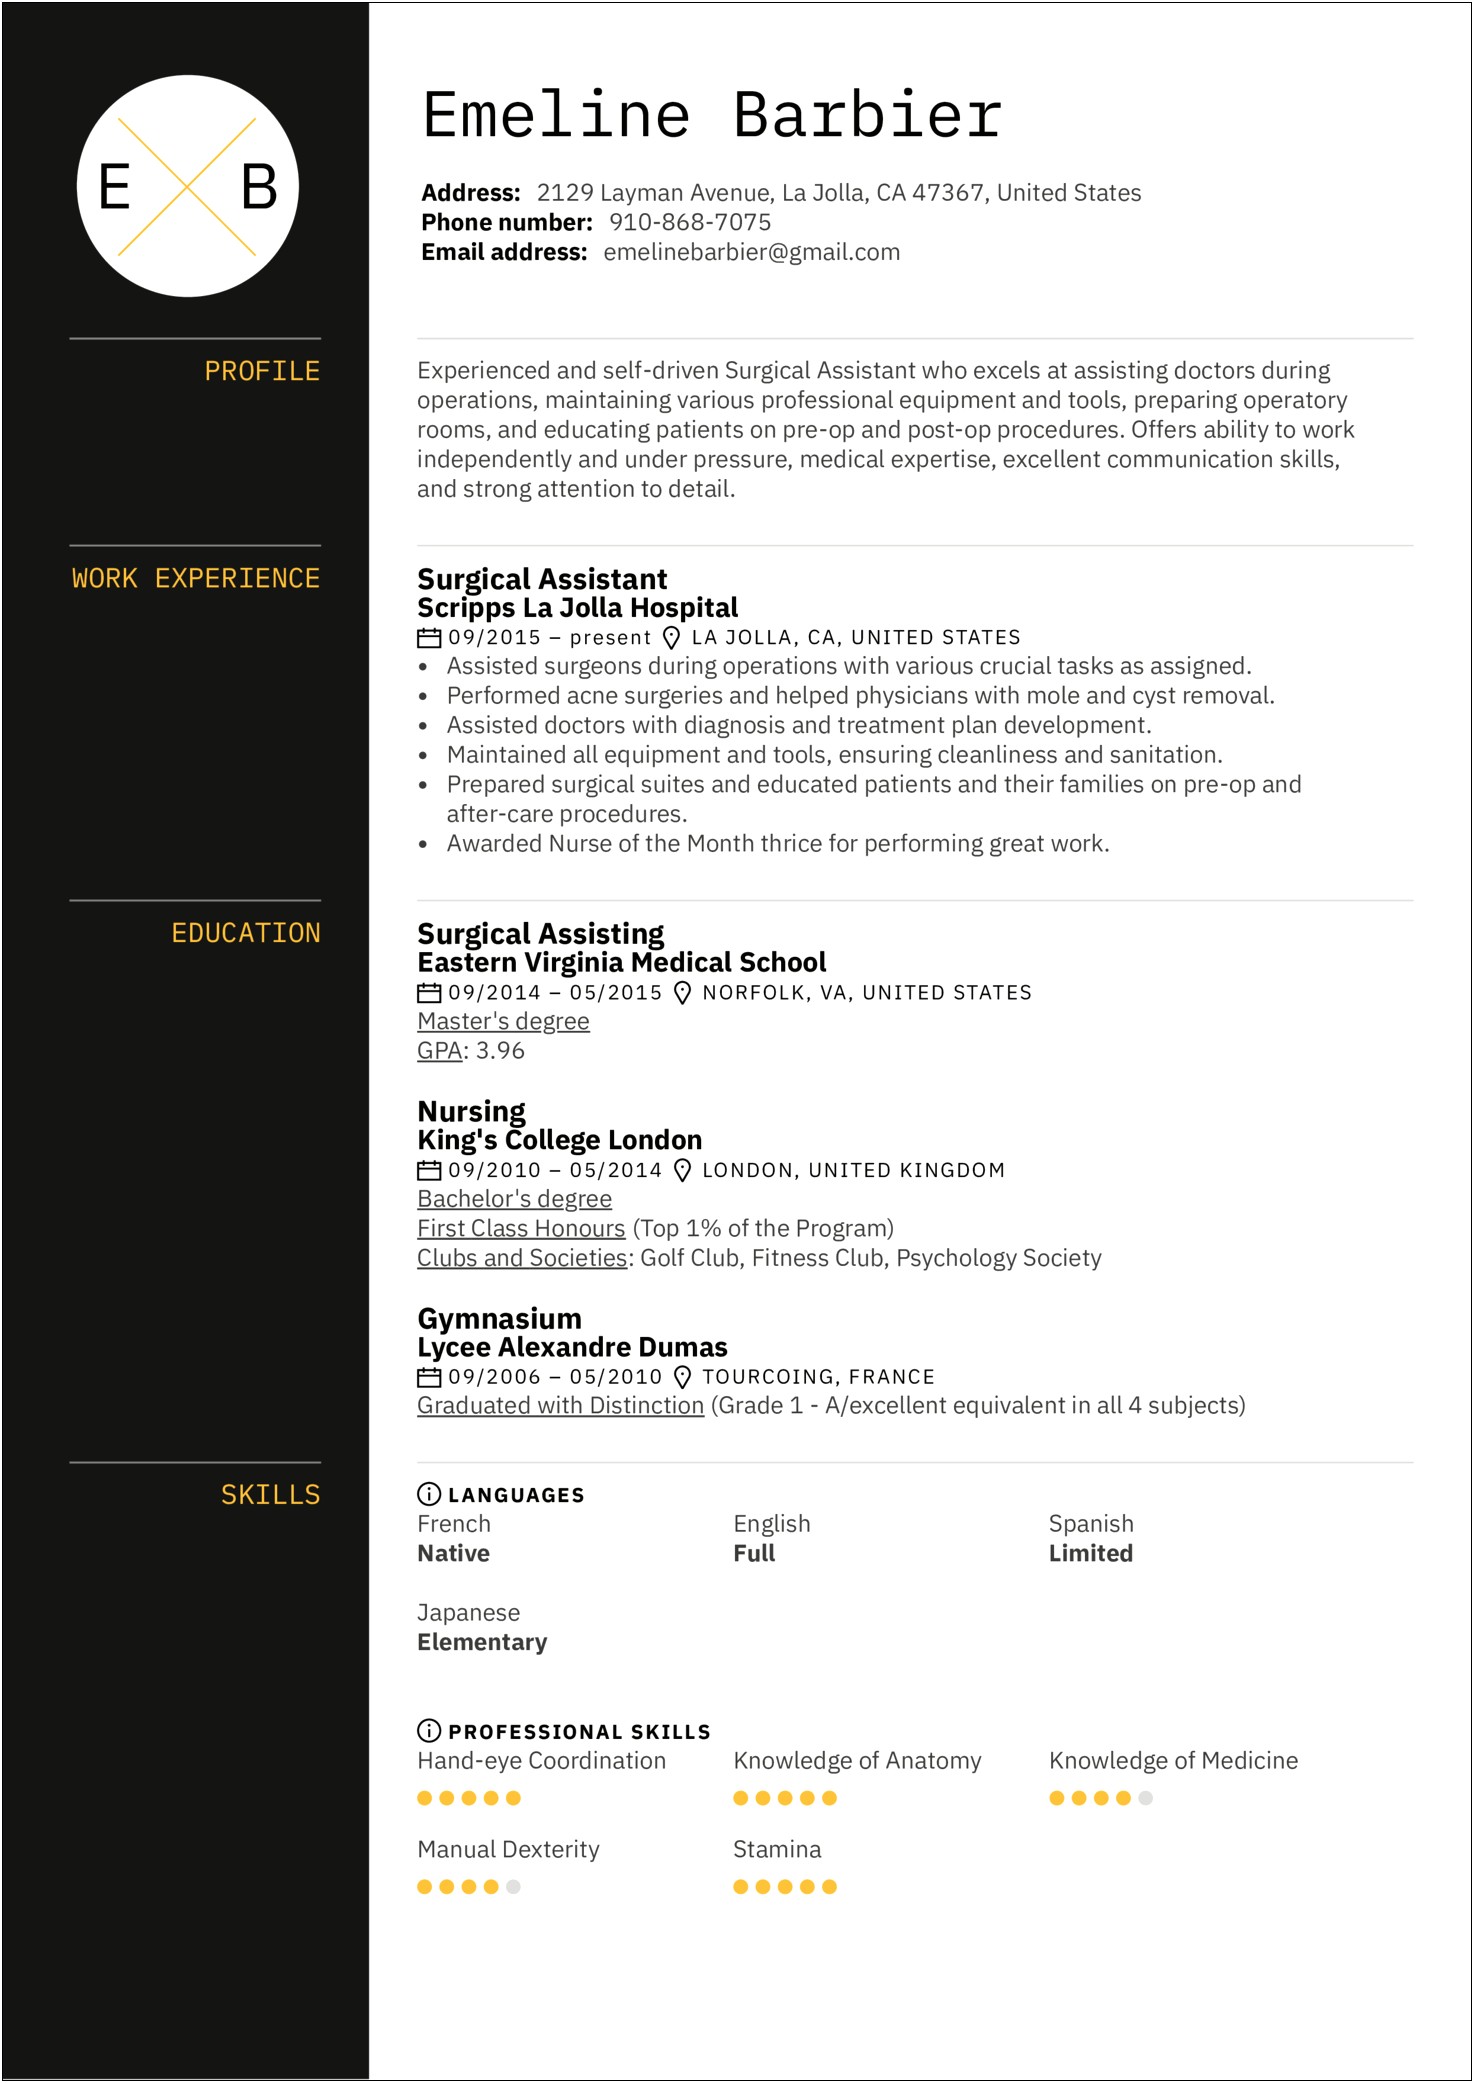 Orthopedic Surgical Coordinating Manager Resume Sample